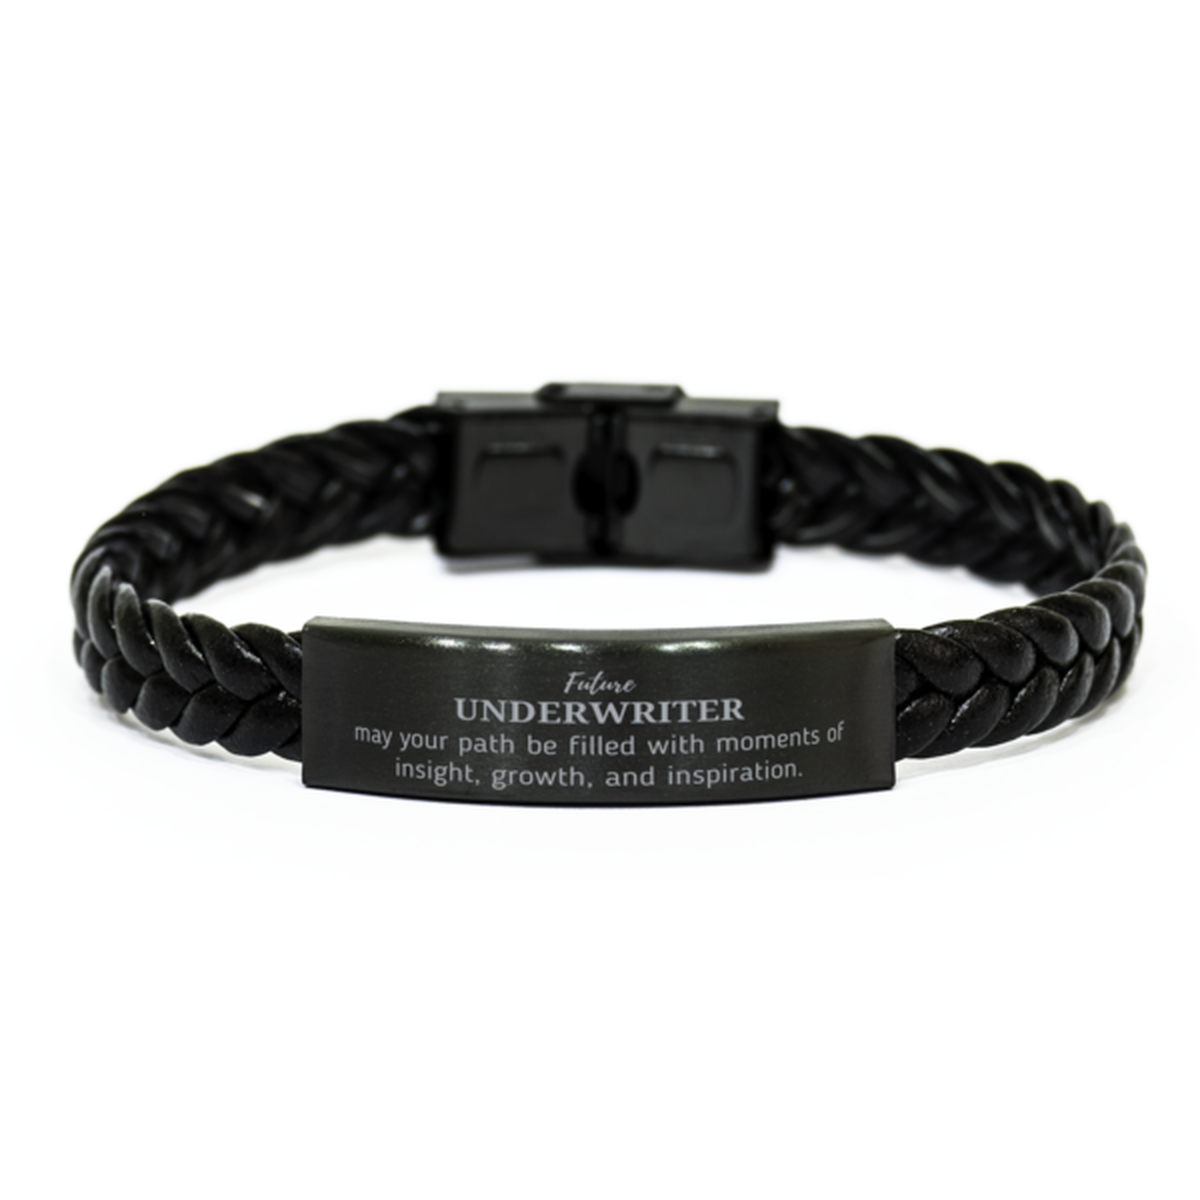 Future Underwriter Gifts, May your path be filled with moments of insight, Graduation Gifts for New Underwriter, Christmas Unique Braided Leather Bracelet For Men, Women, Friends